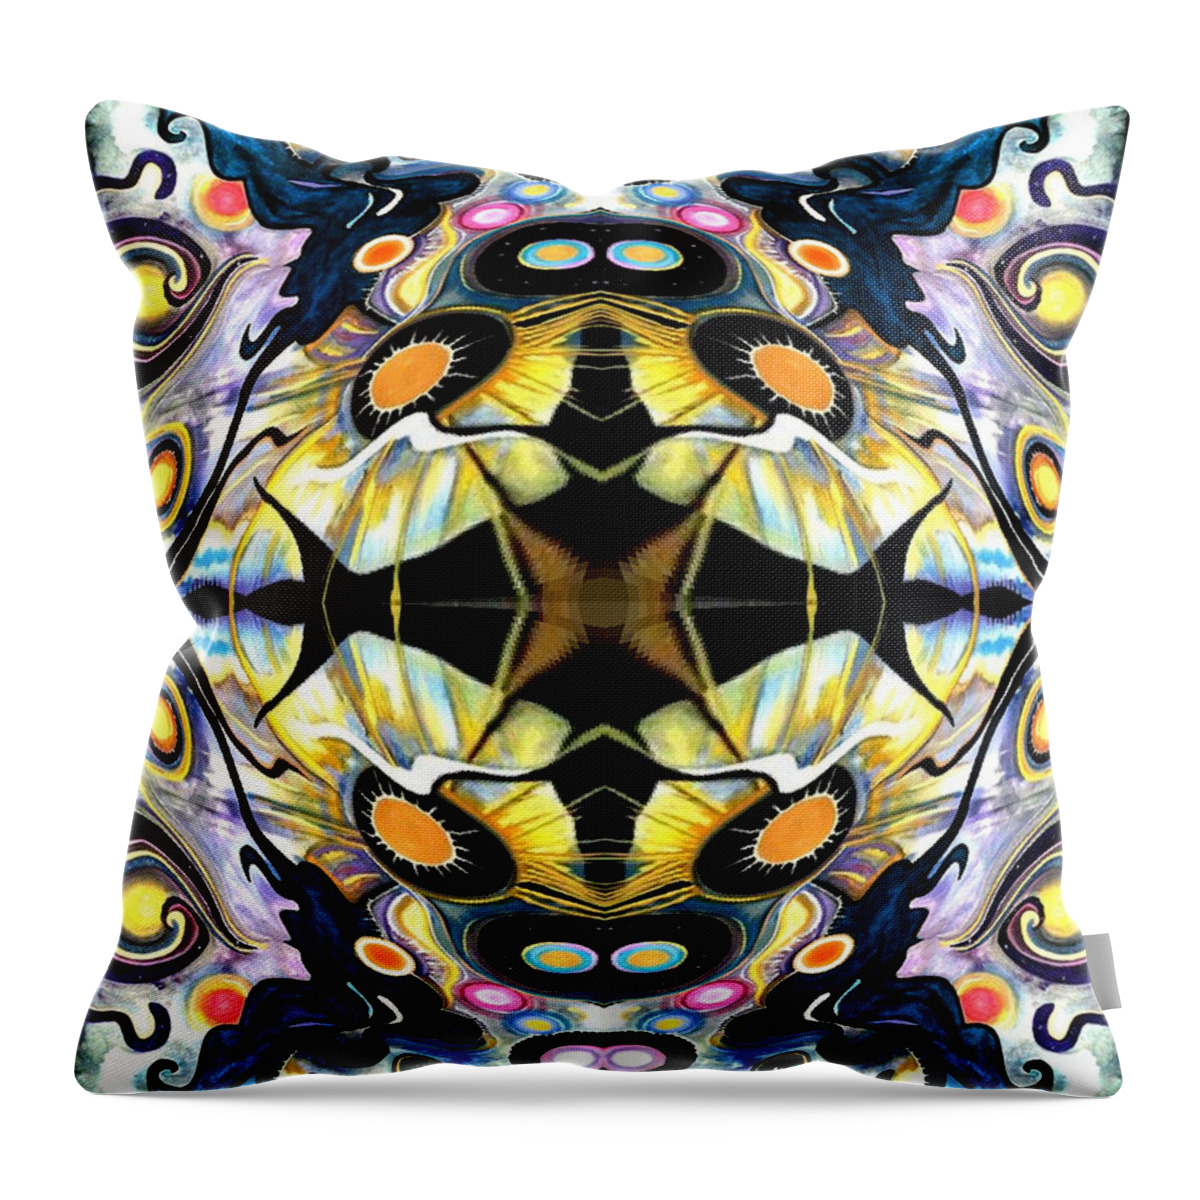  Throw Pillow featuring the mixed media Distorted Serenity by Tracy McDurmon